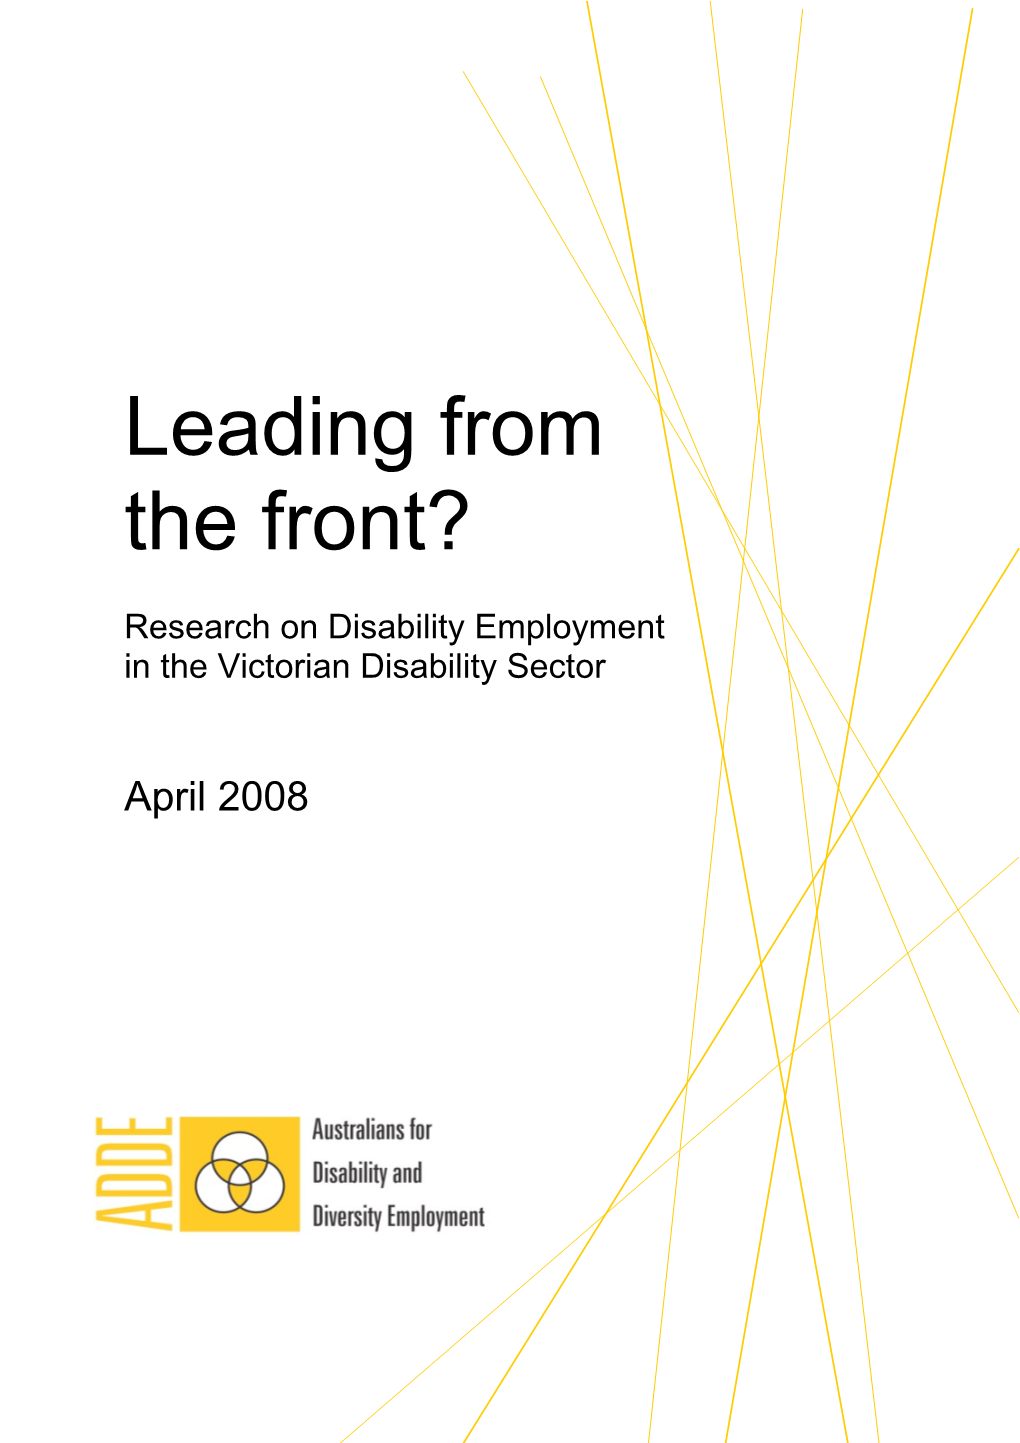 In the Victorian Disability Sector